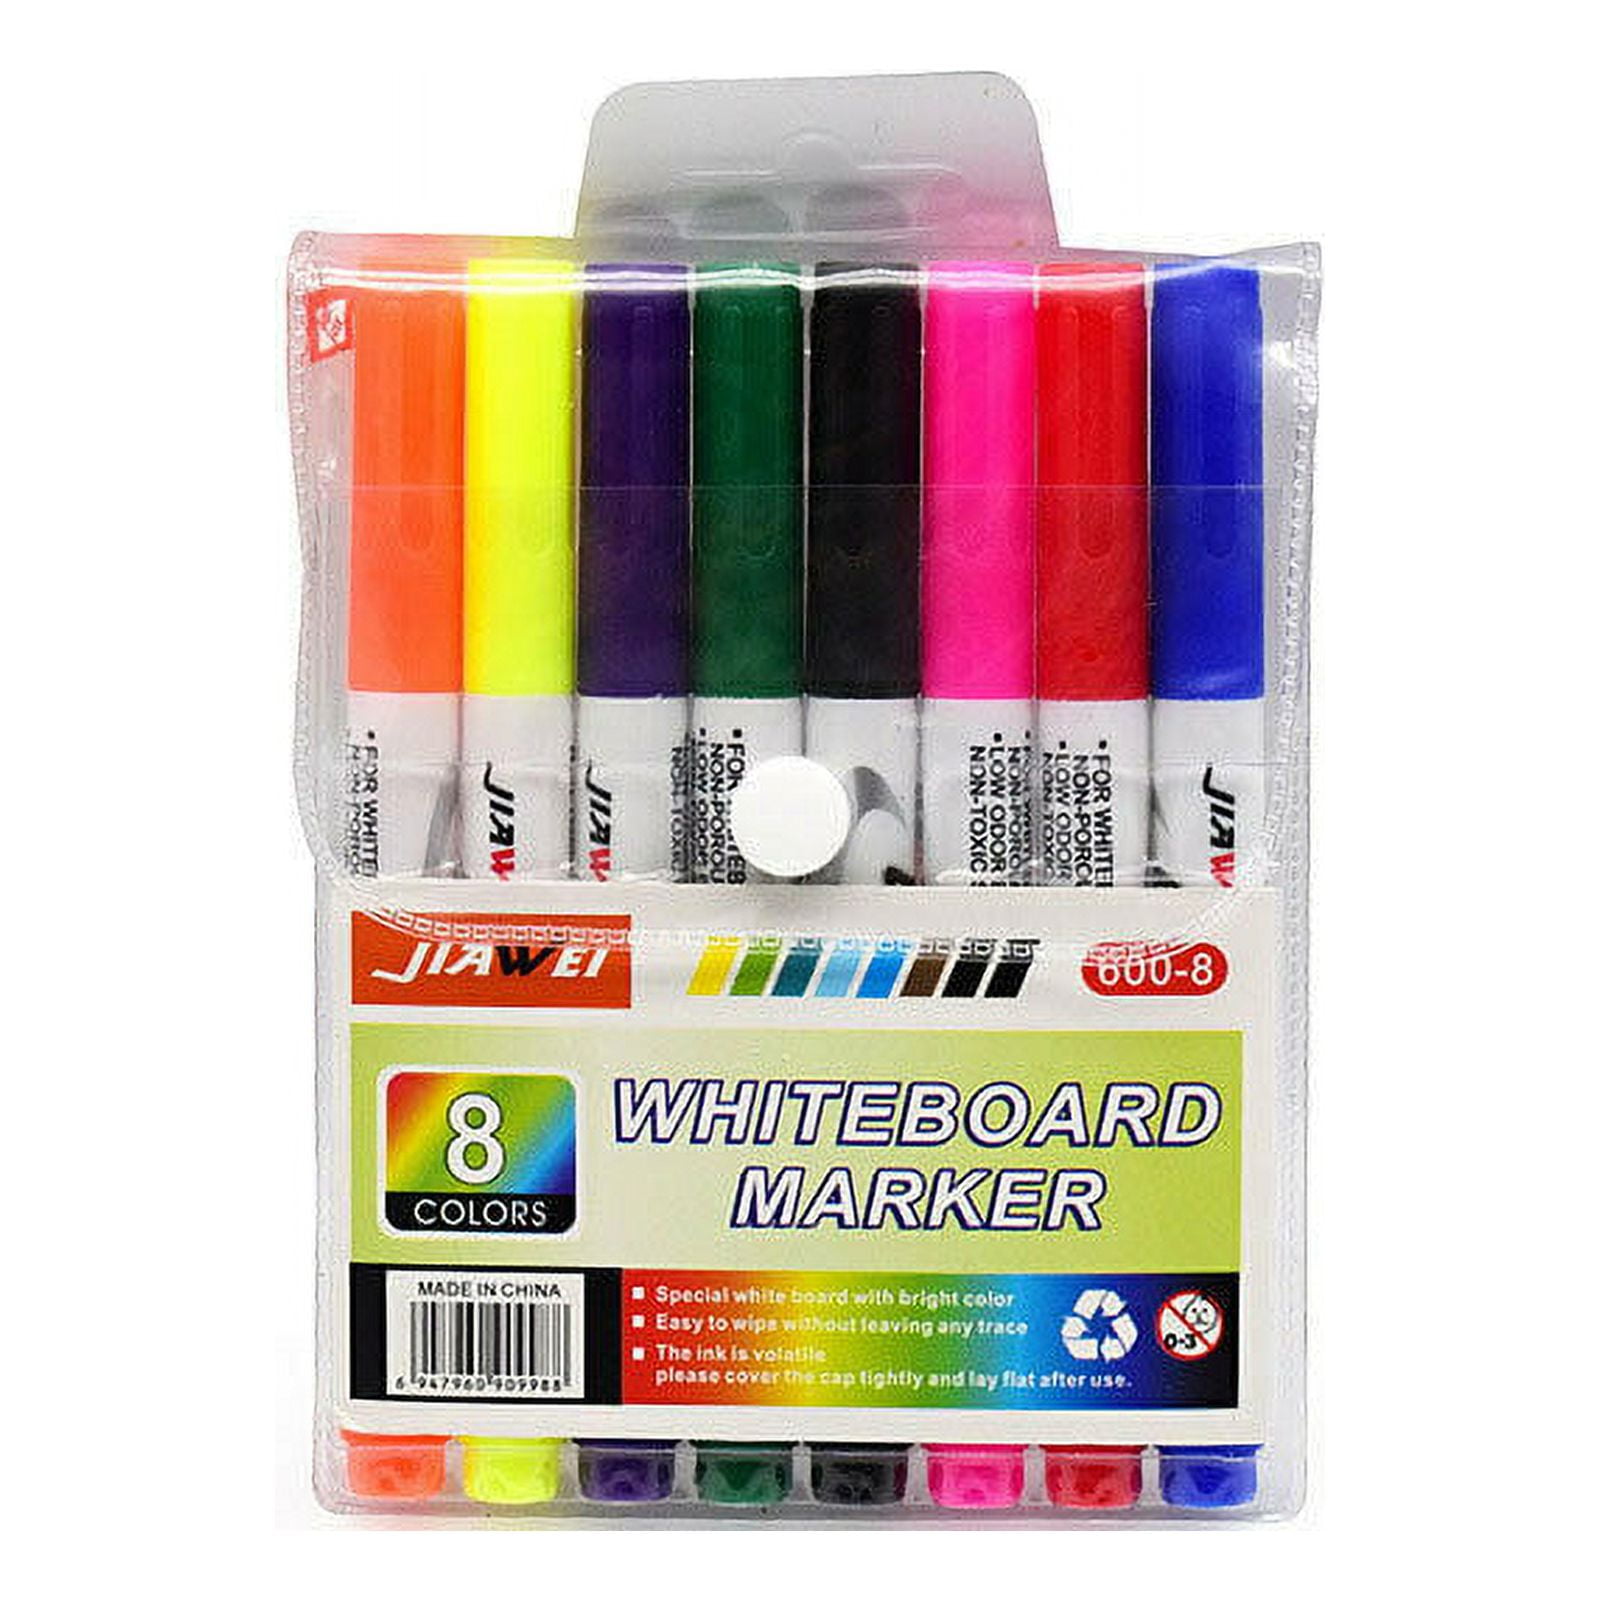 KINGSNATION Water Floating Sketch Pen Magical Water Painting Doodle  Pen Nib Sketch Pens with Washable Ink - Water Floating Pen